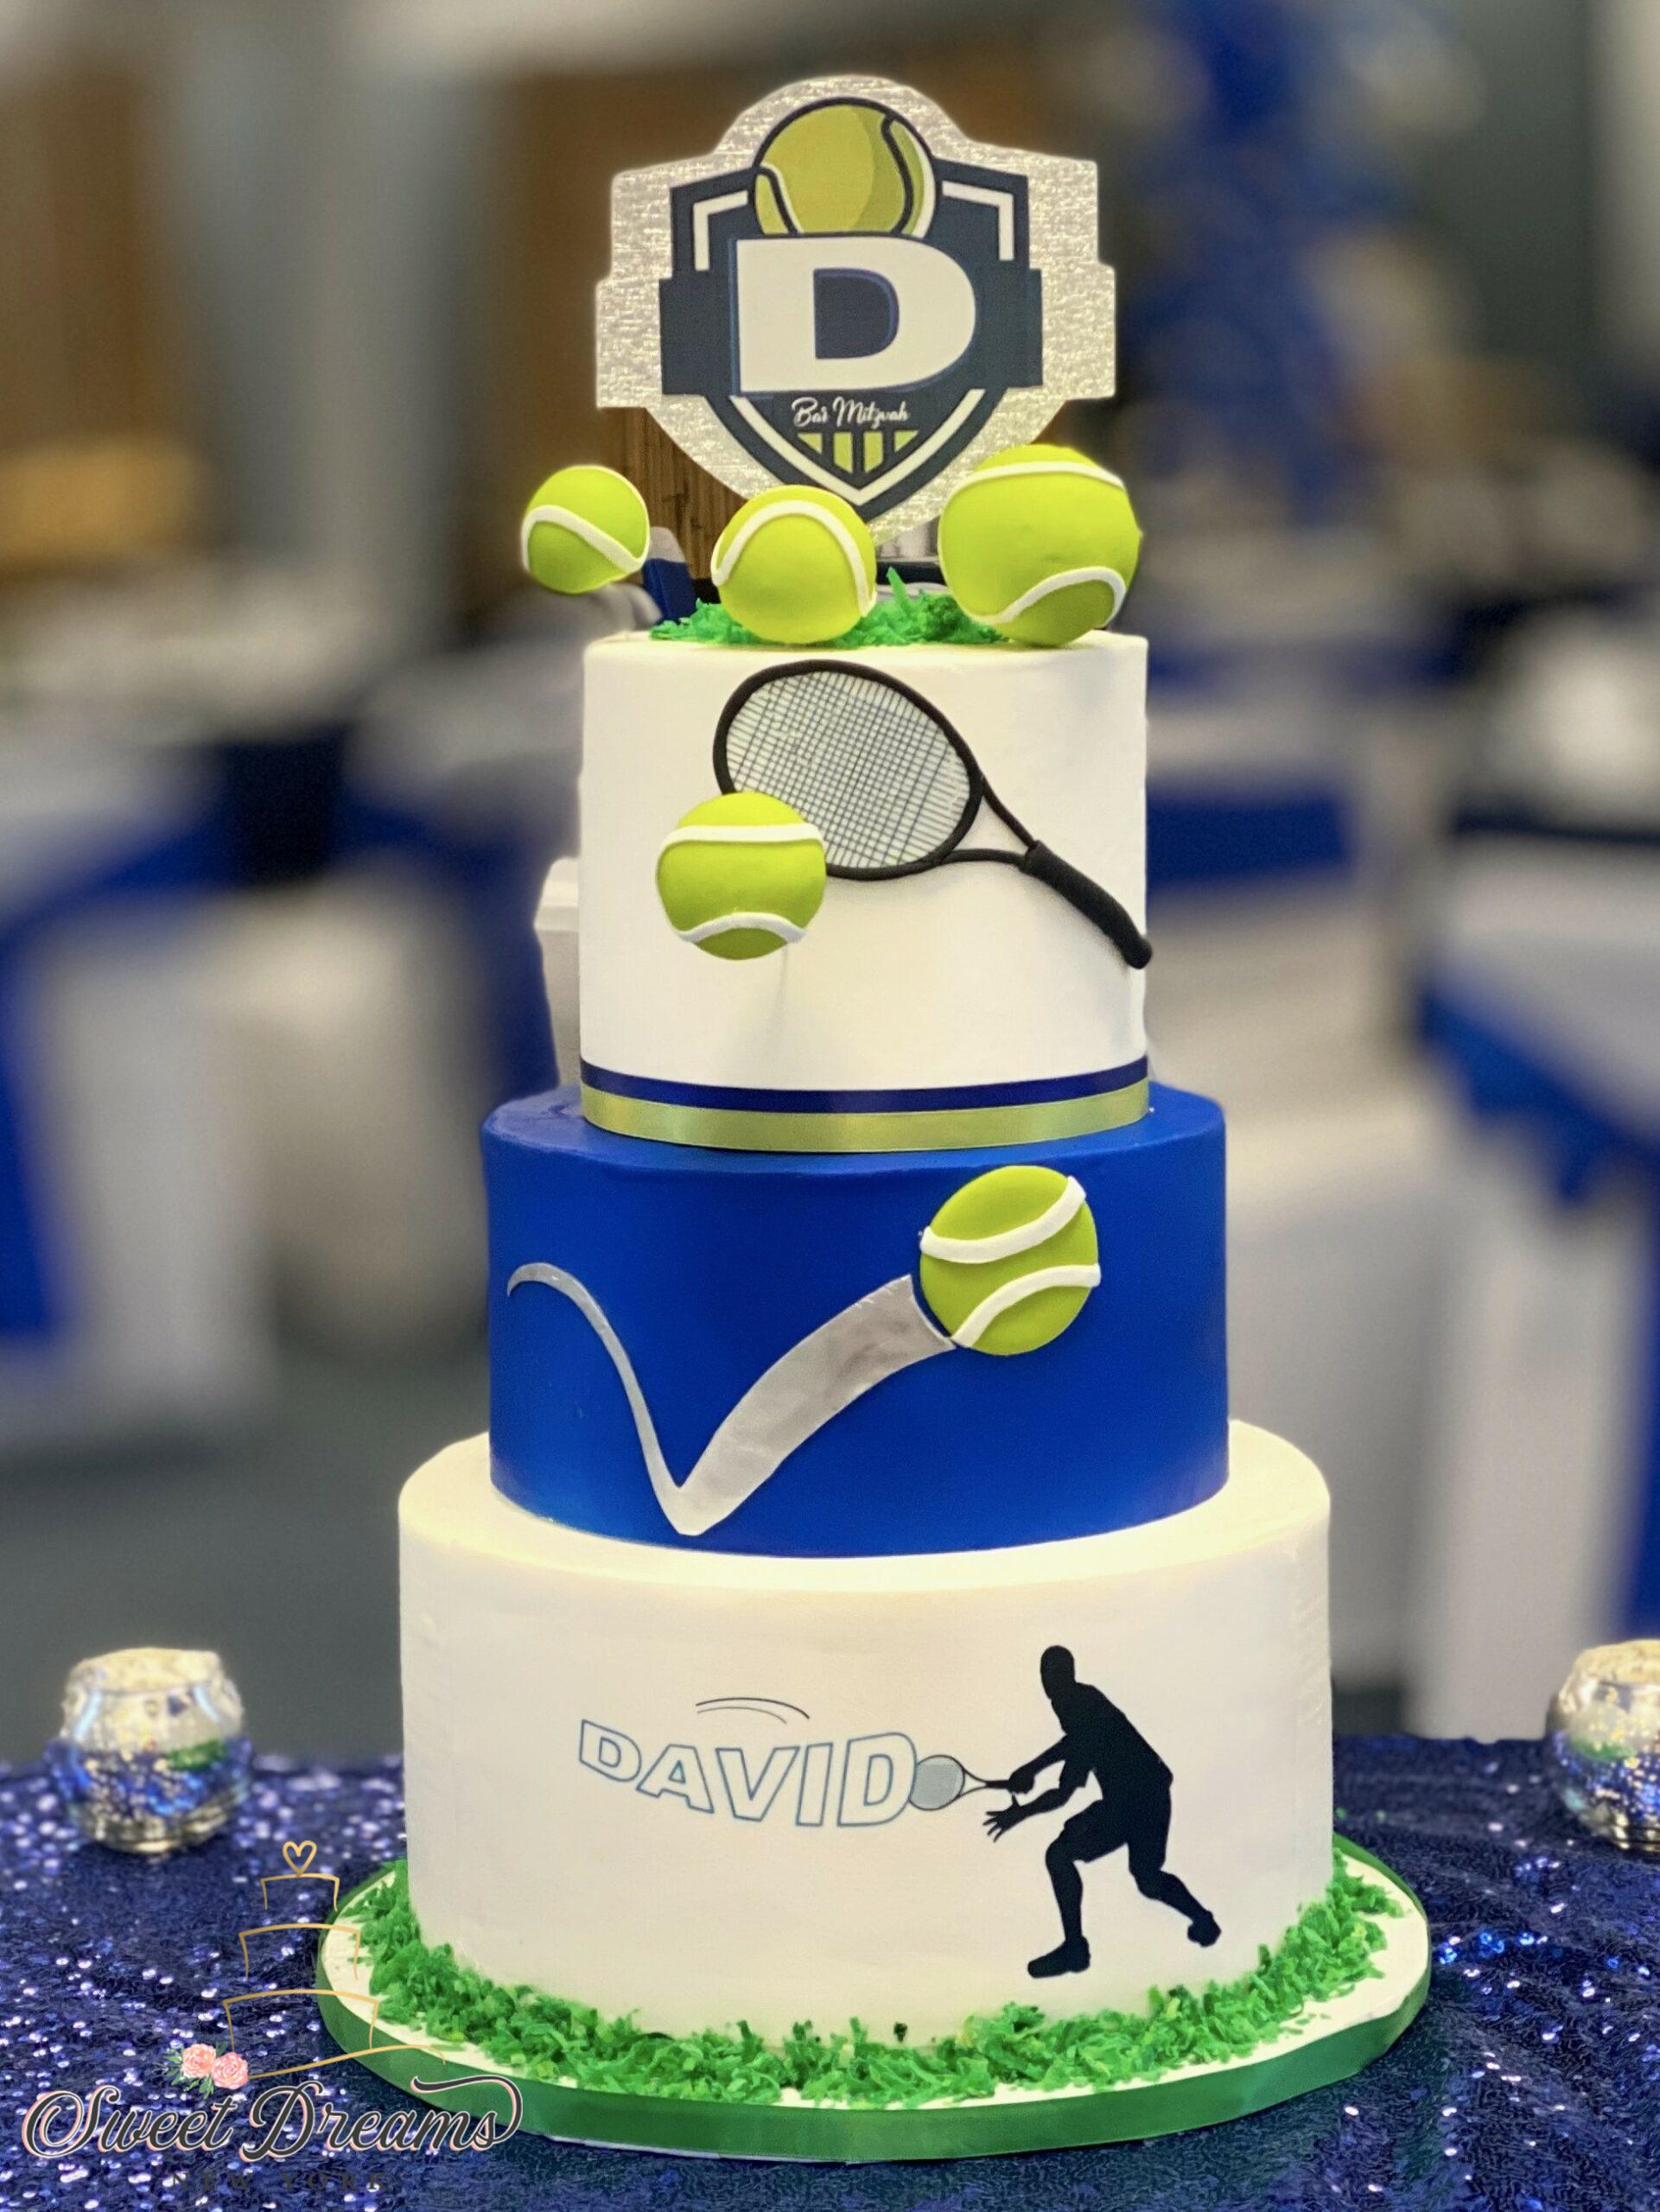 Bar Mitzvah Cakes Pictures Gallery (34 Pics)